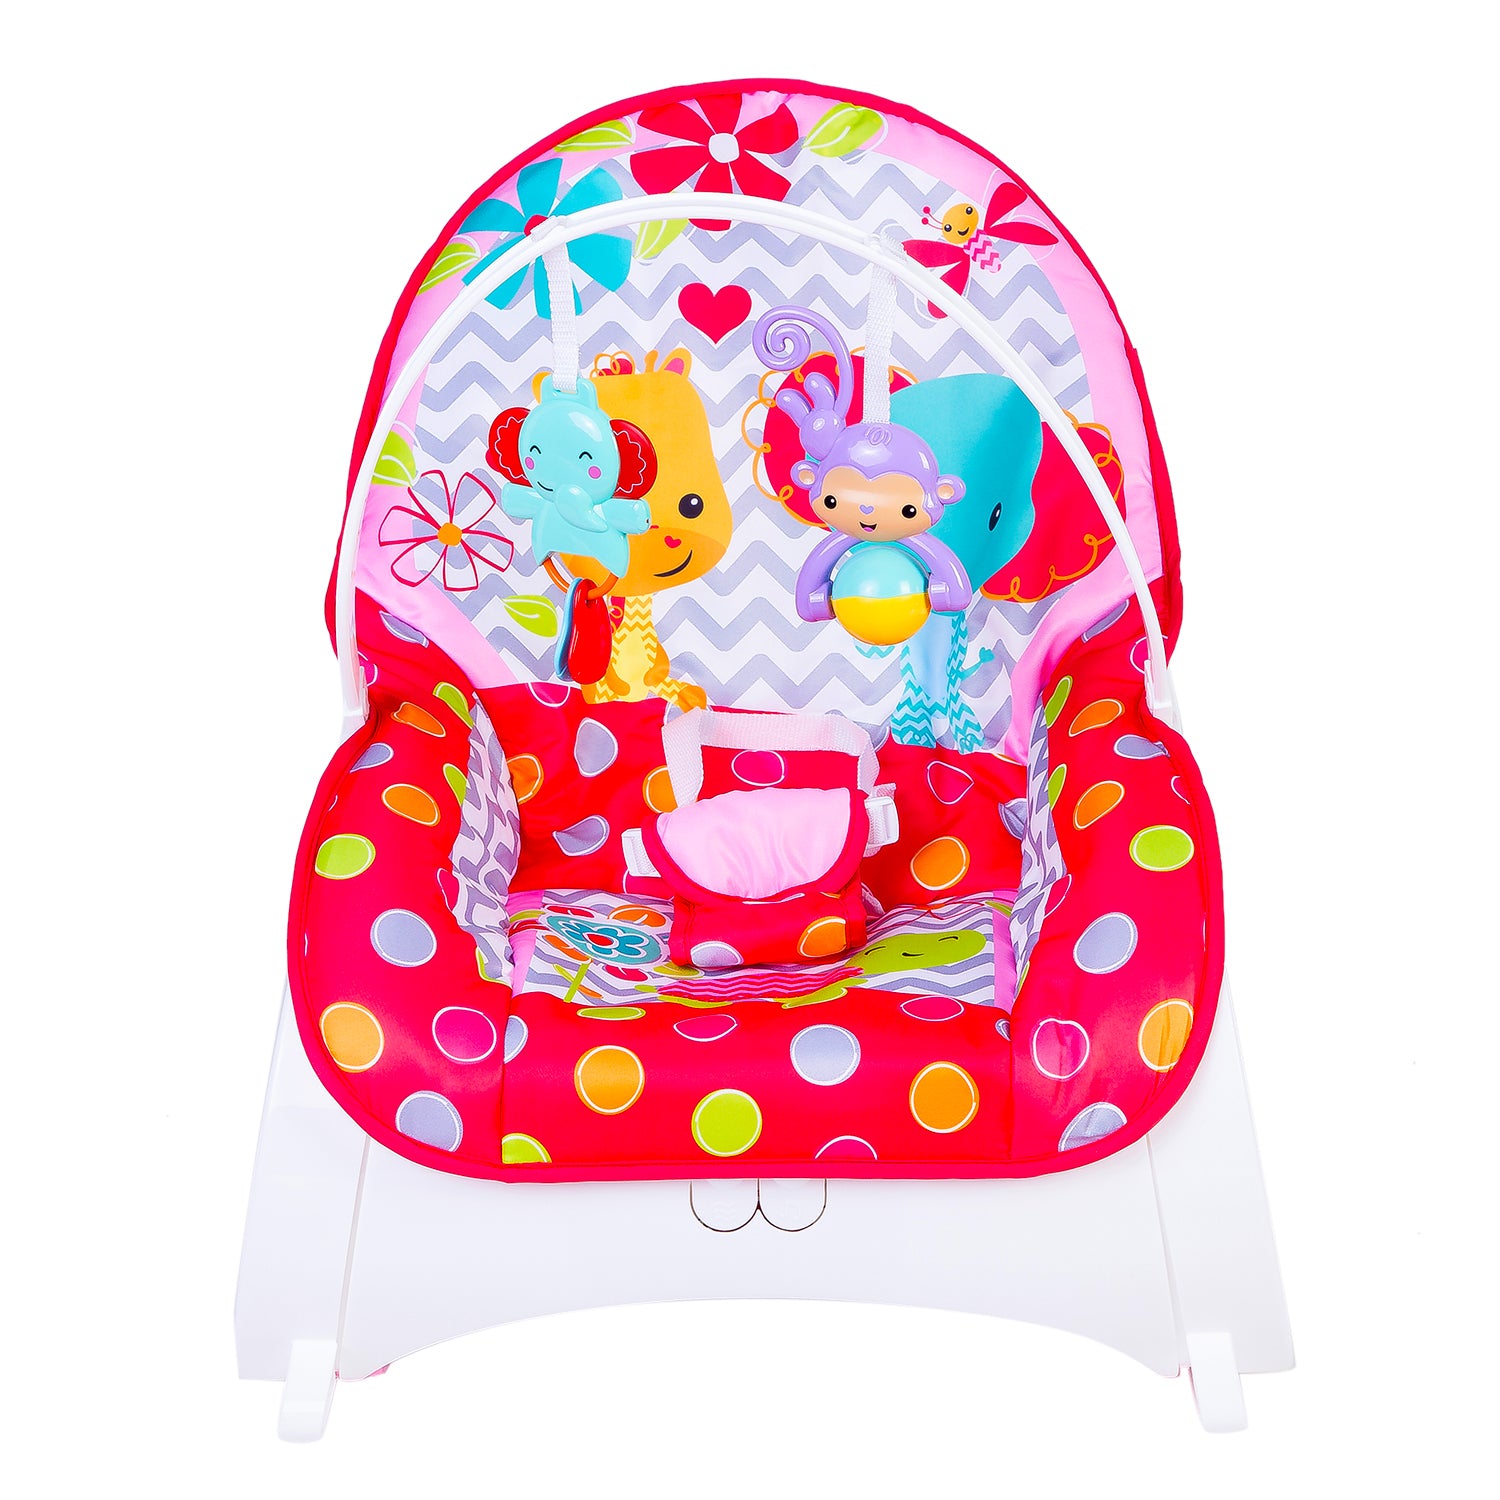 Infant To Toddler Polka Dotted Portable Rocker With Hanging Toys Red & Pink